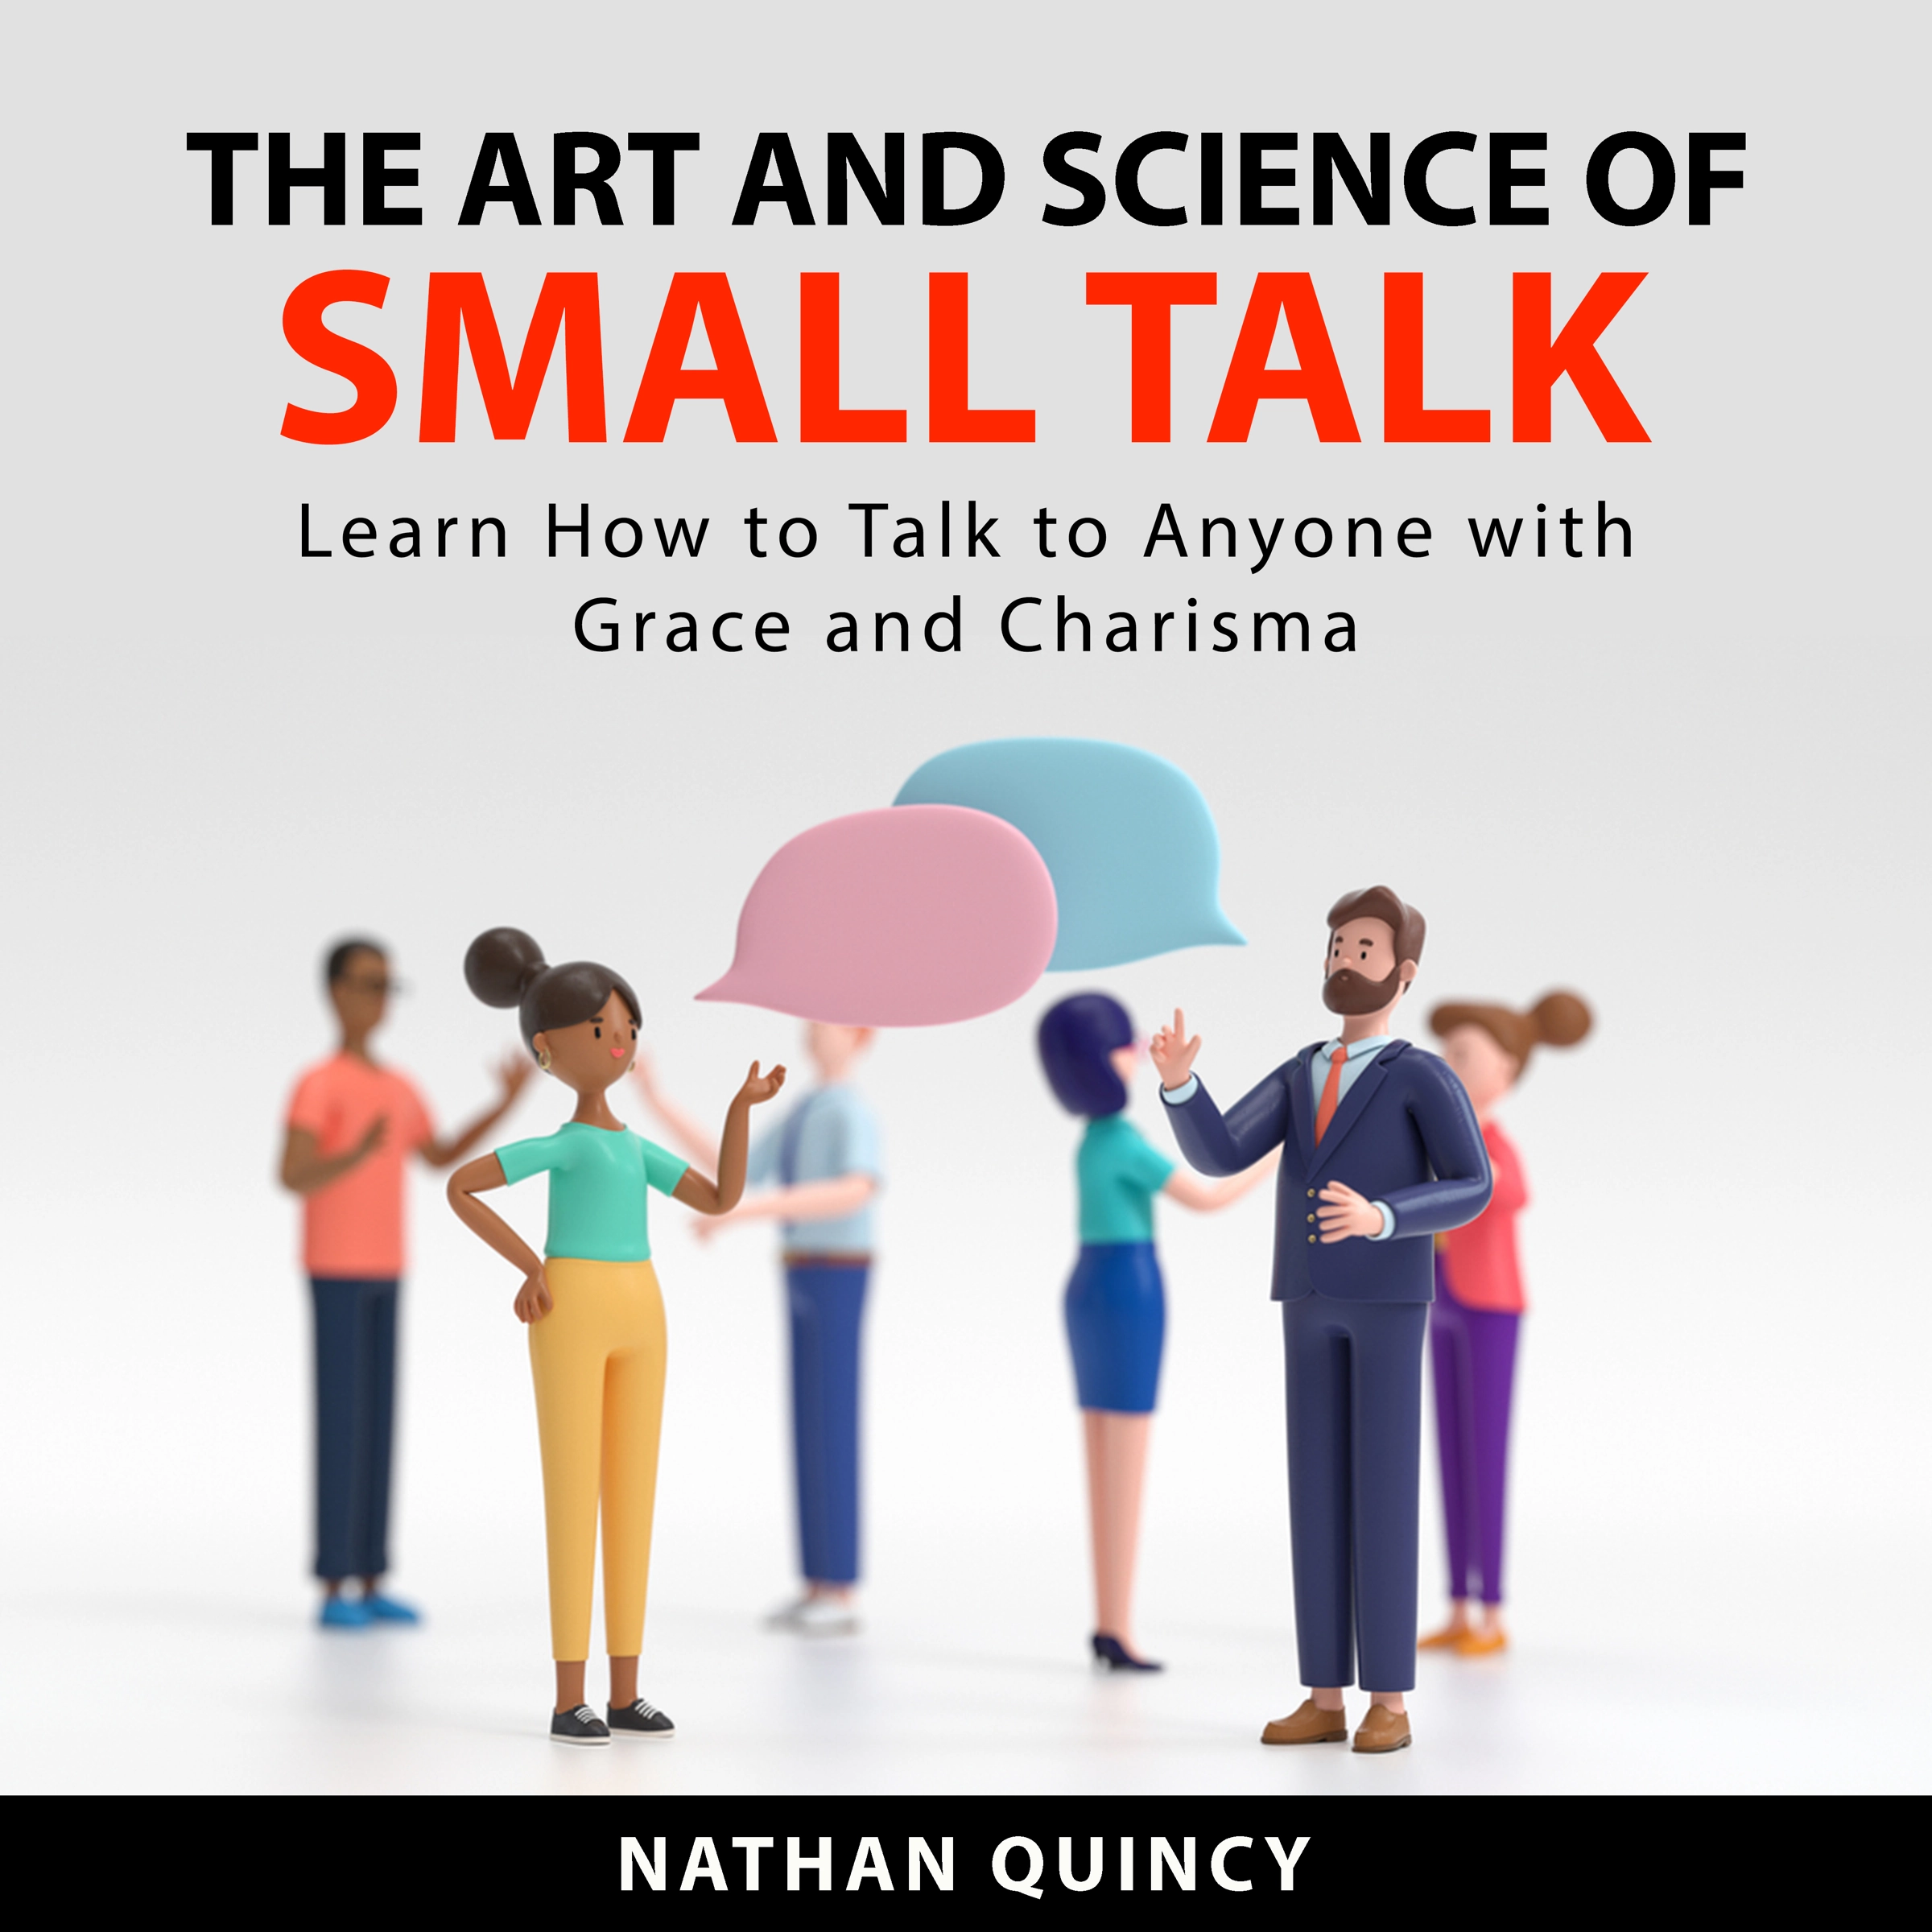 The Art and Science of Small Talk Audiobook by Nathan Quincy